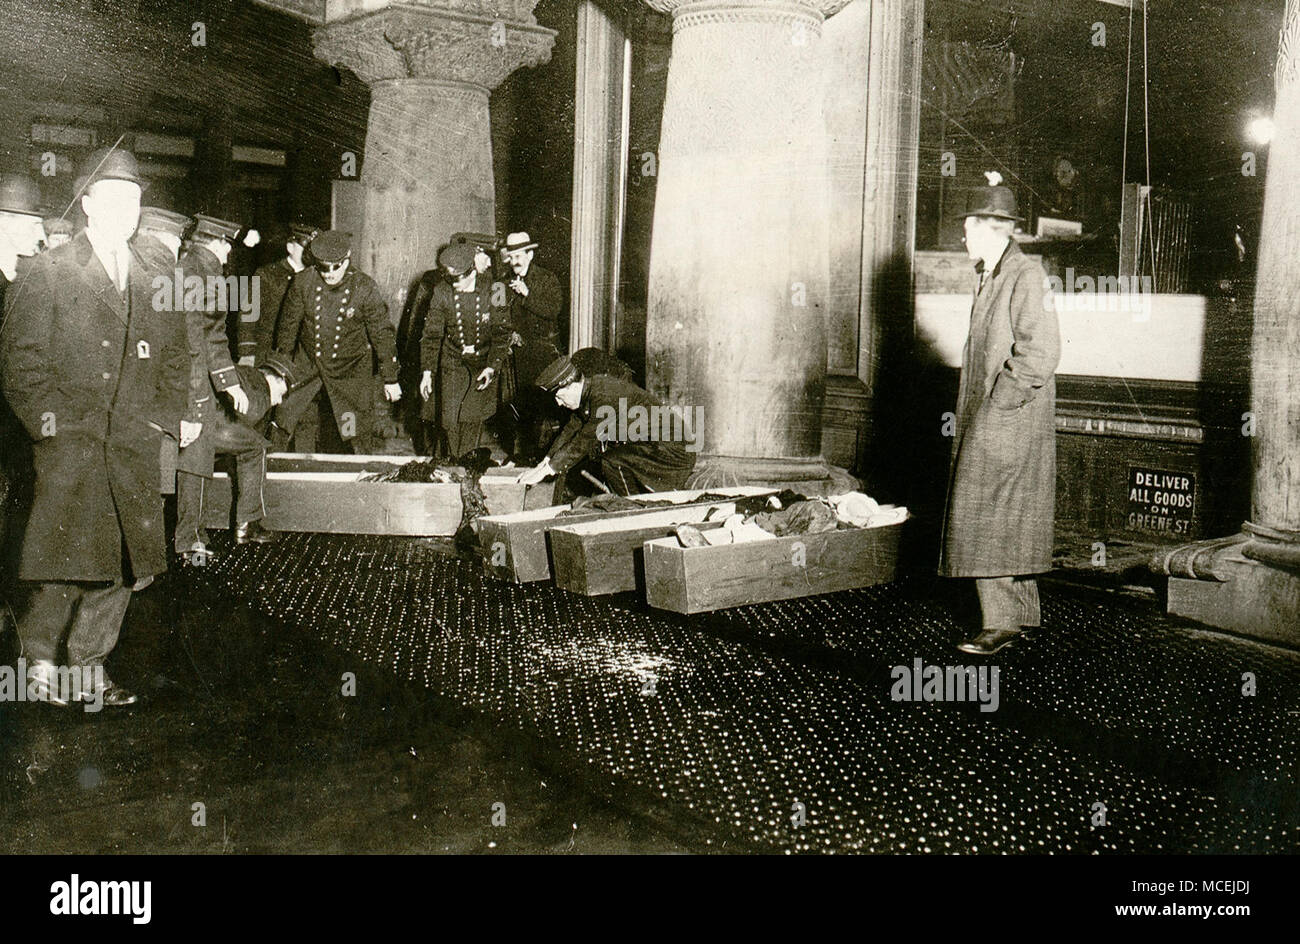 Photograph shows police or fire officials placing Triangle Shirtwaist Company fire victims in coffins. March 25 1911 Stock Photo